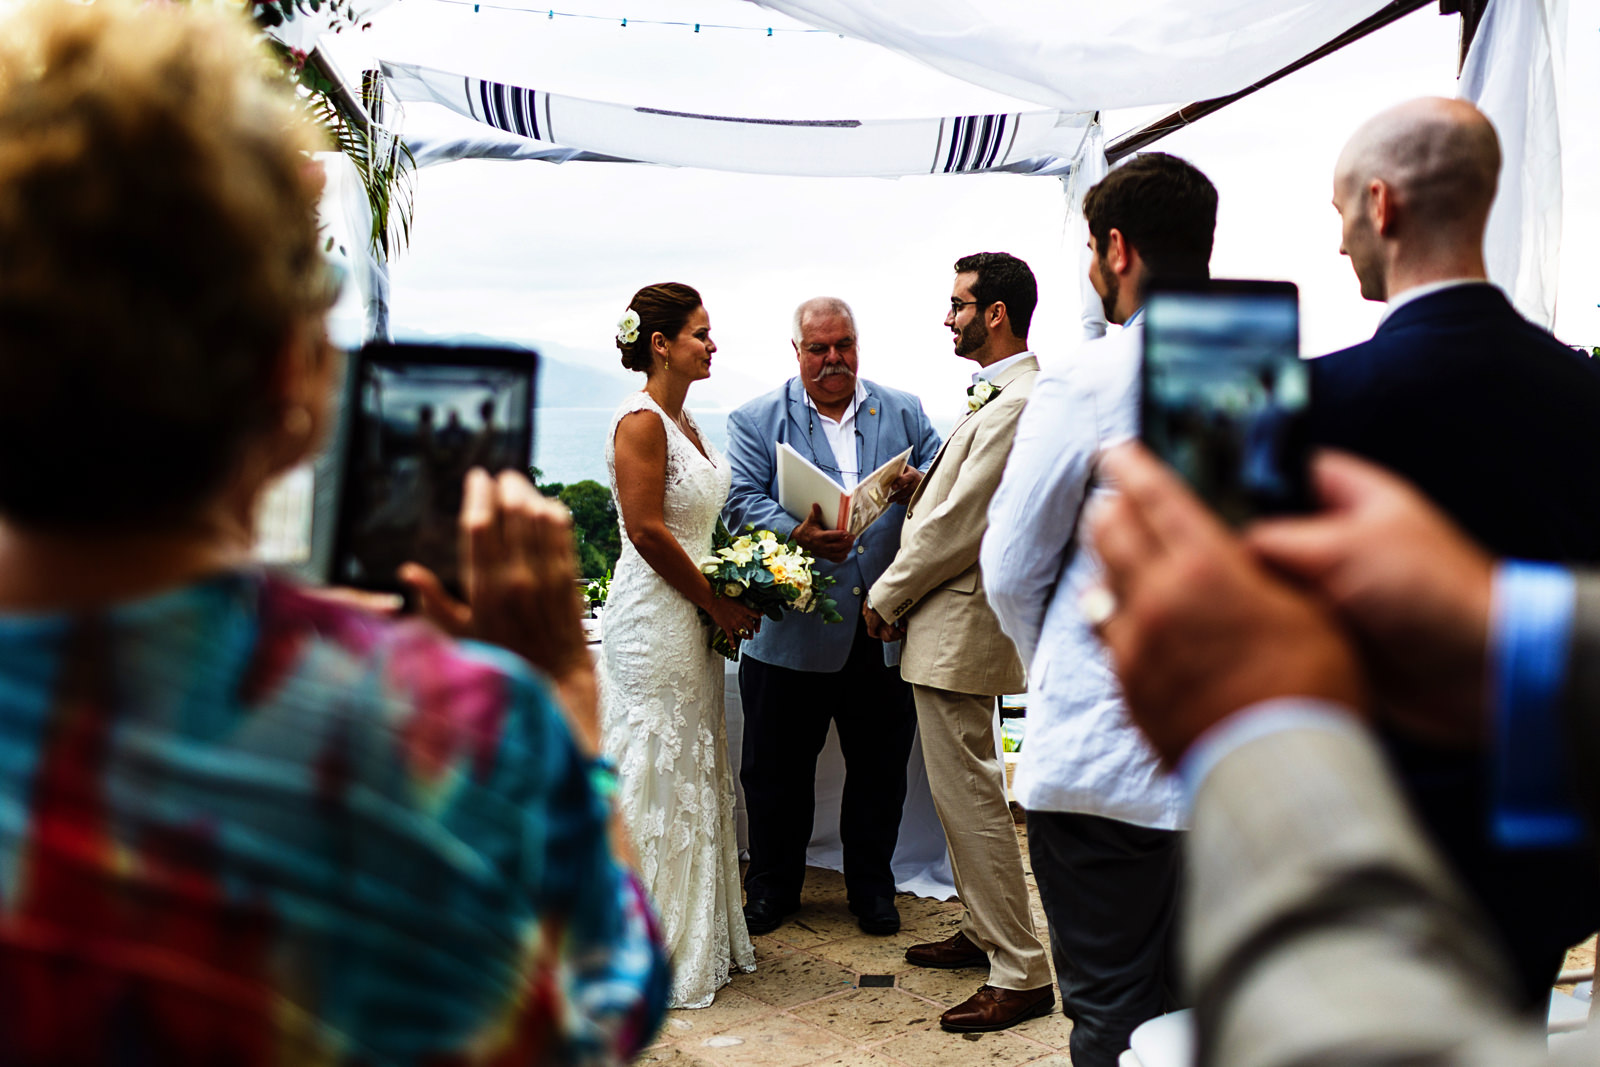 The guest taking pictures with their smartphones at the wedding ceremony